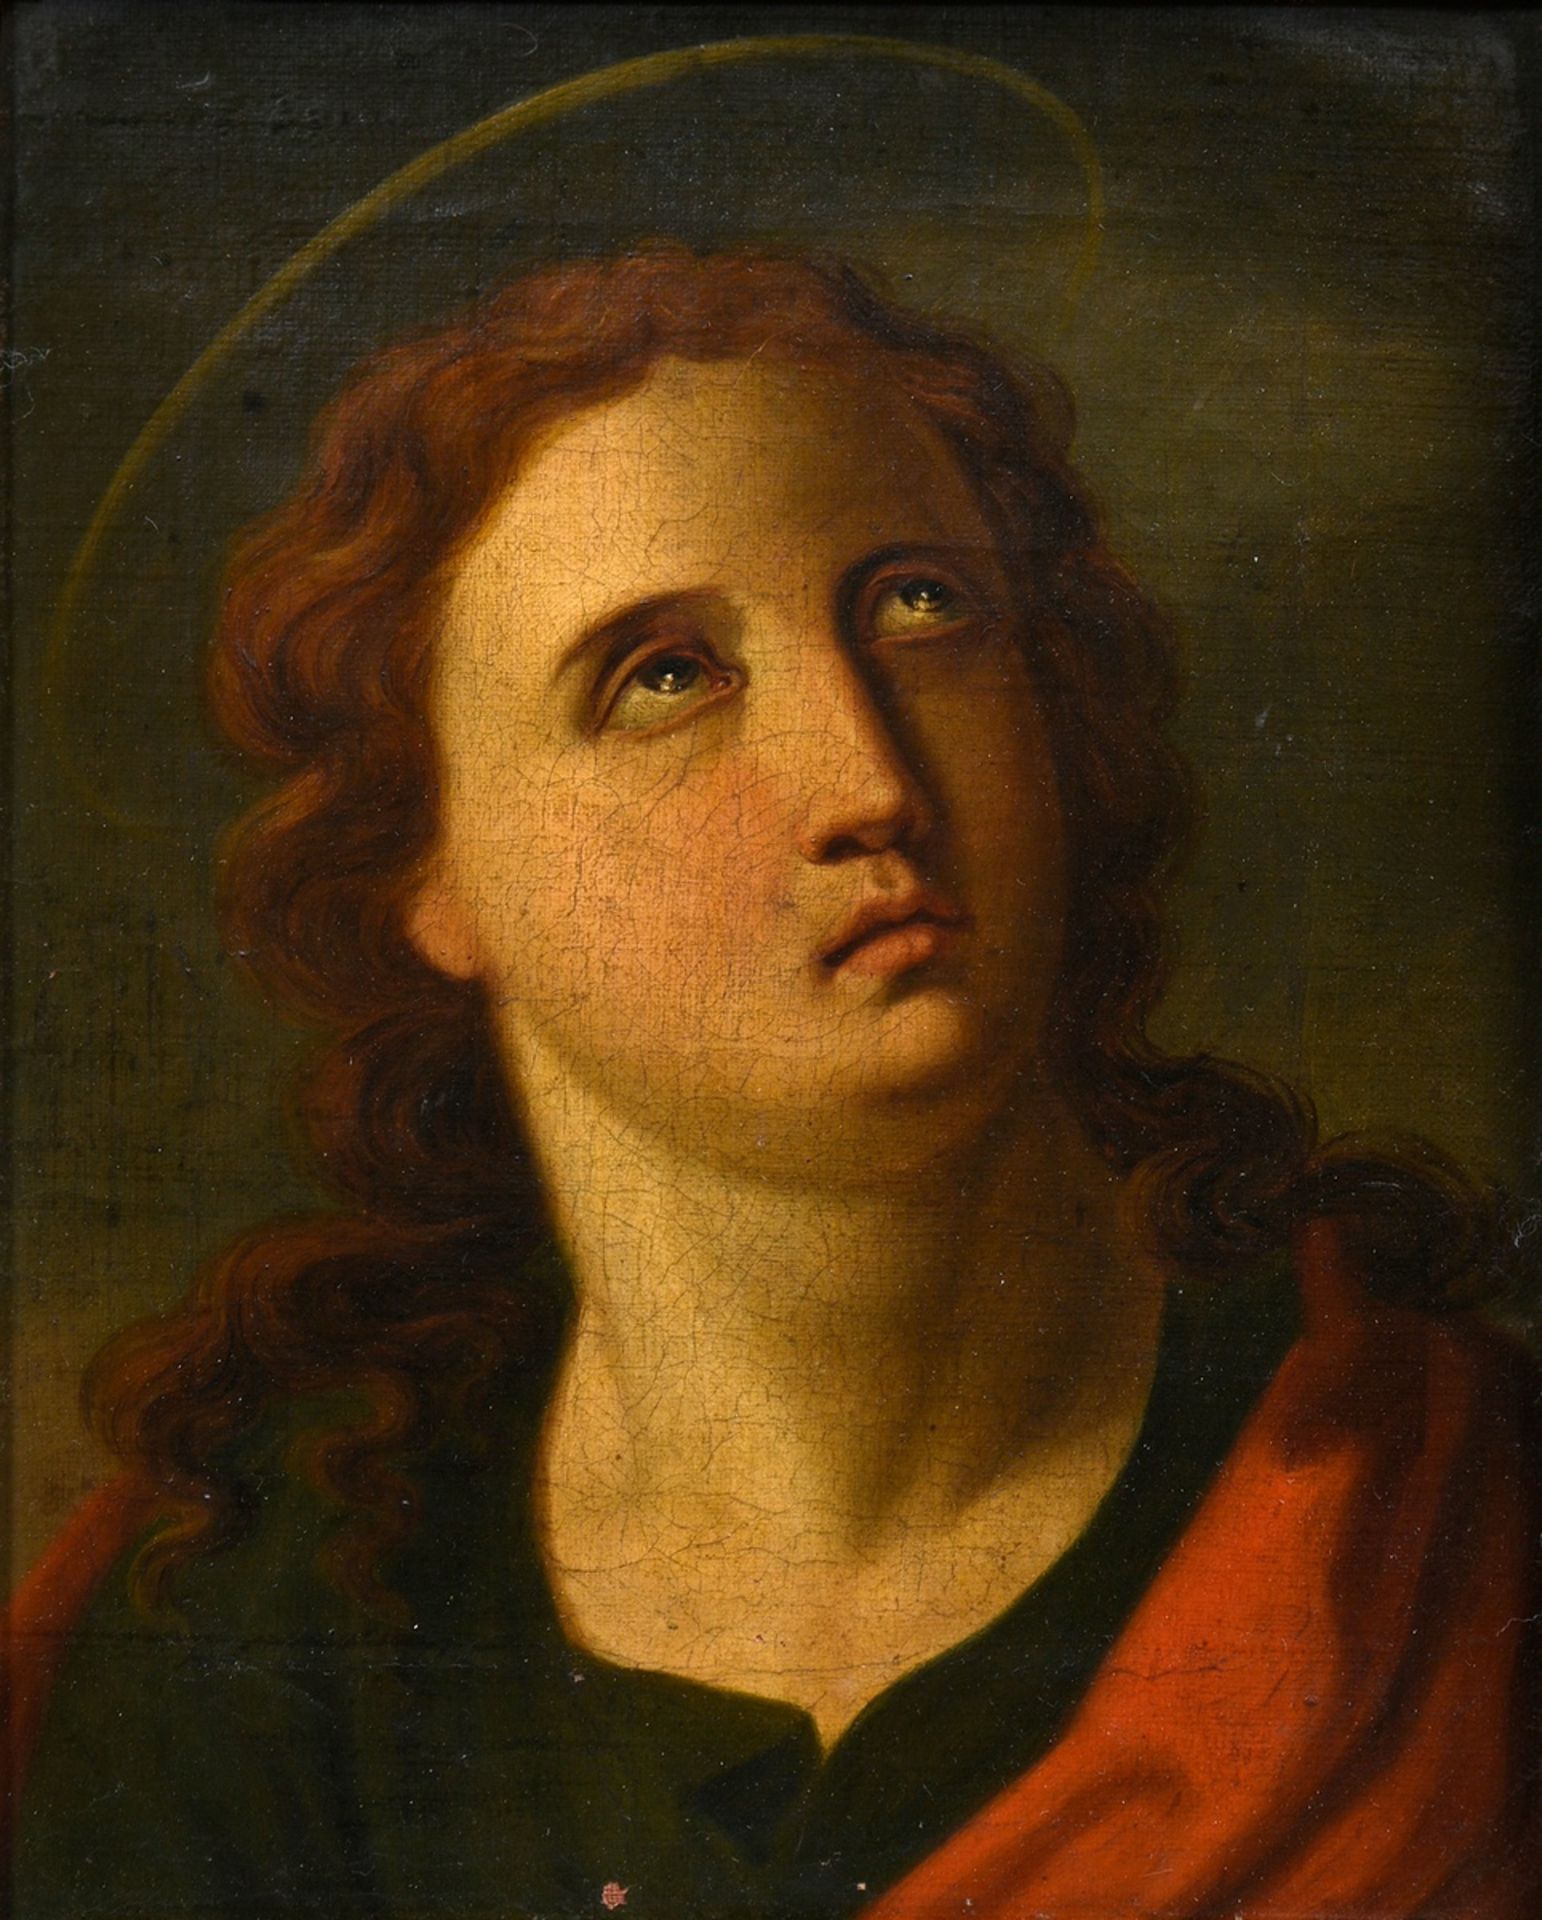 Unknown painter of the 18th c. "Evangelist", oil/canvas, verso old adhesive label "Galerie Commeter